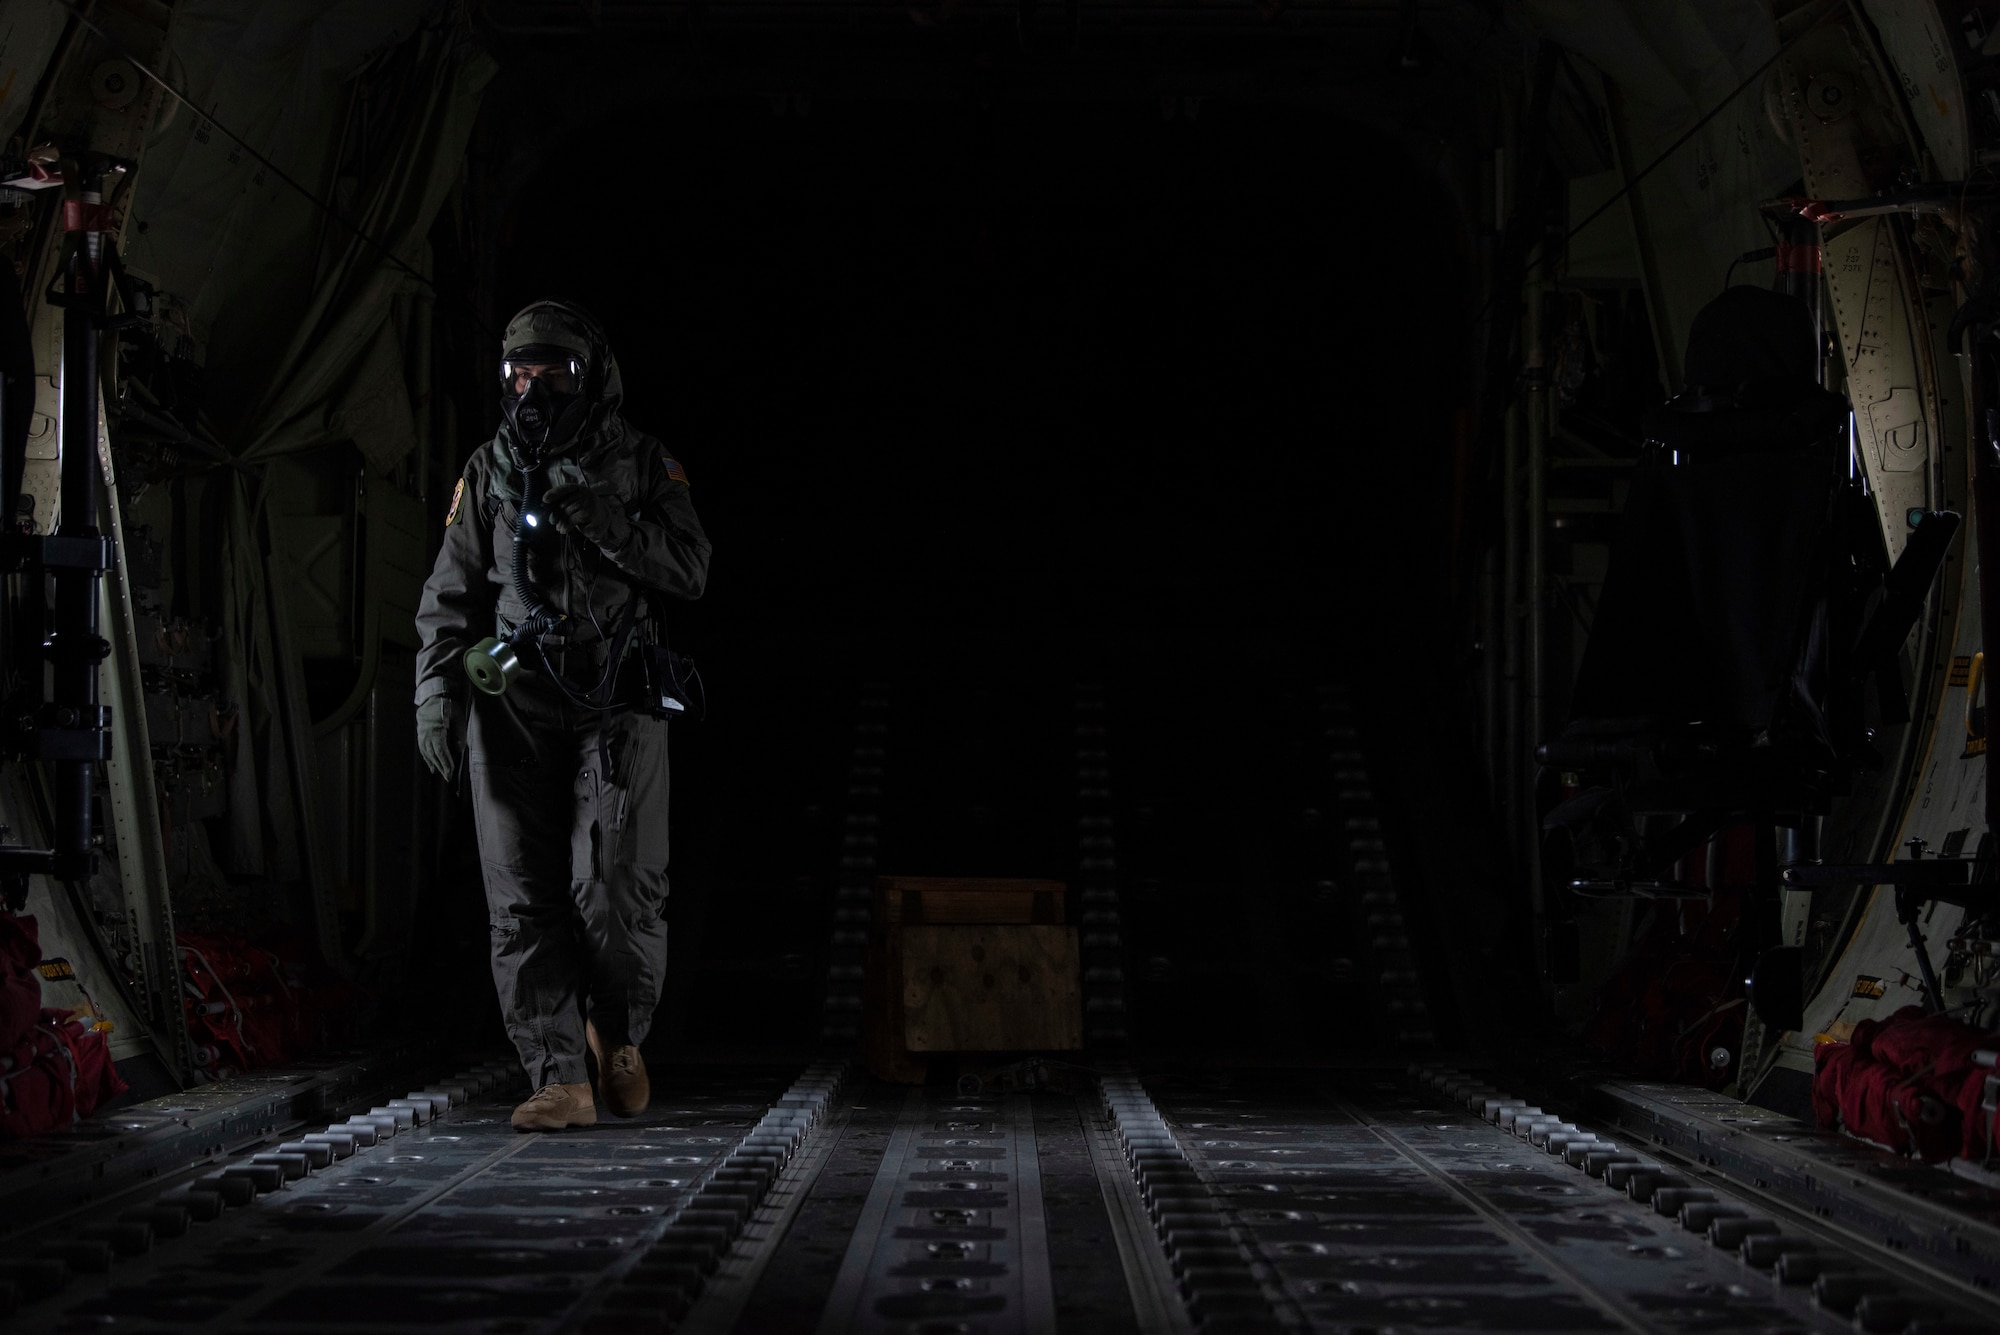 Staff Sgt. Tristan Geray, 40th Airlift Squadron loadmaster, conducts preflight checks in the cargo bay of a C-130J Super Hercules at Dyess Air Force Base, Texas, June 3, 2021. Geray participated in the field testing of the new Two-Piece Undergarment universal integrative ensemble chemical, biological, radioactive and nuclear protective equipment. (U.S. Air Force photo by Airman 1st Class Colin Hollowell)